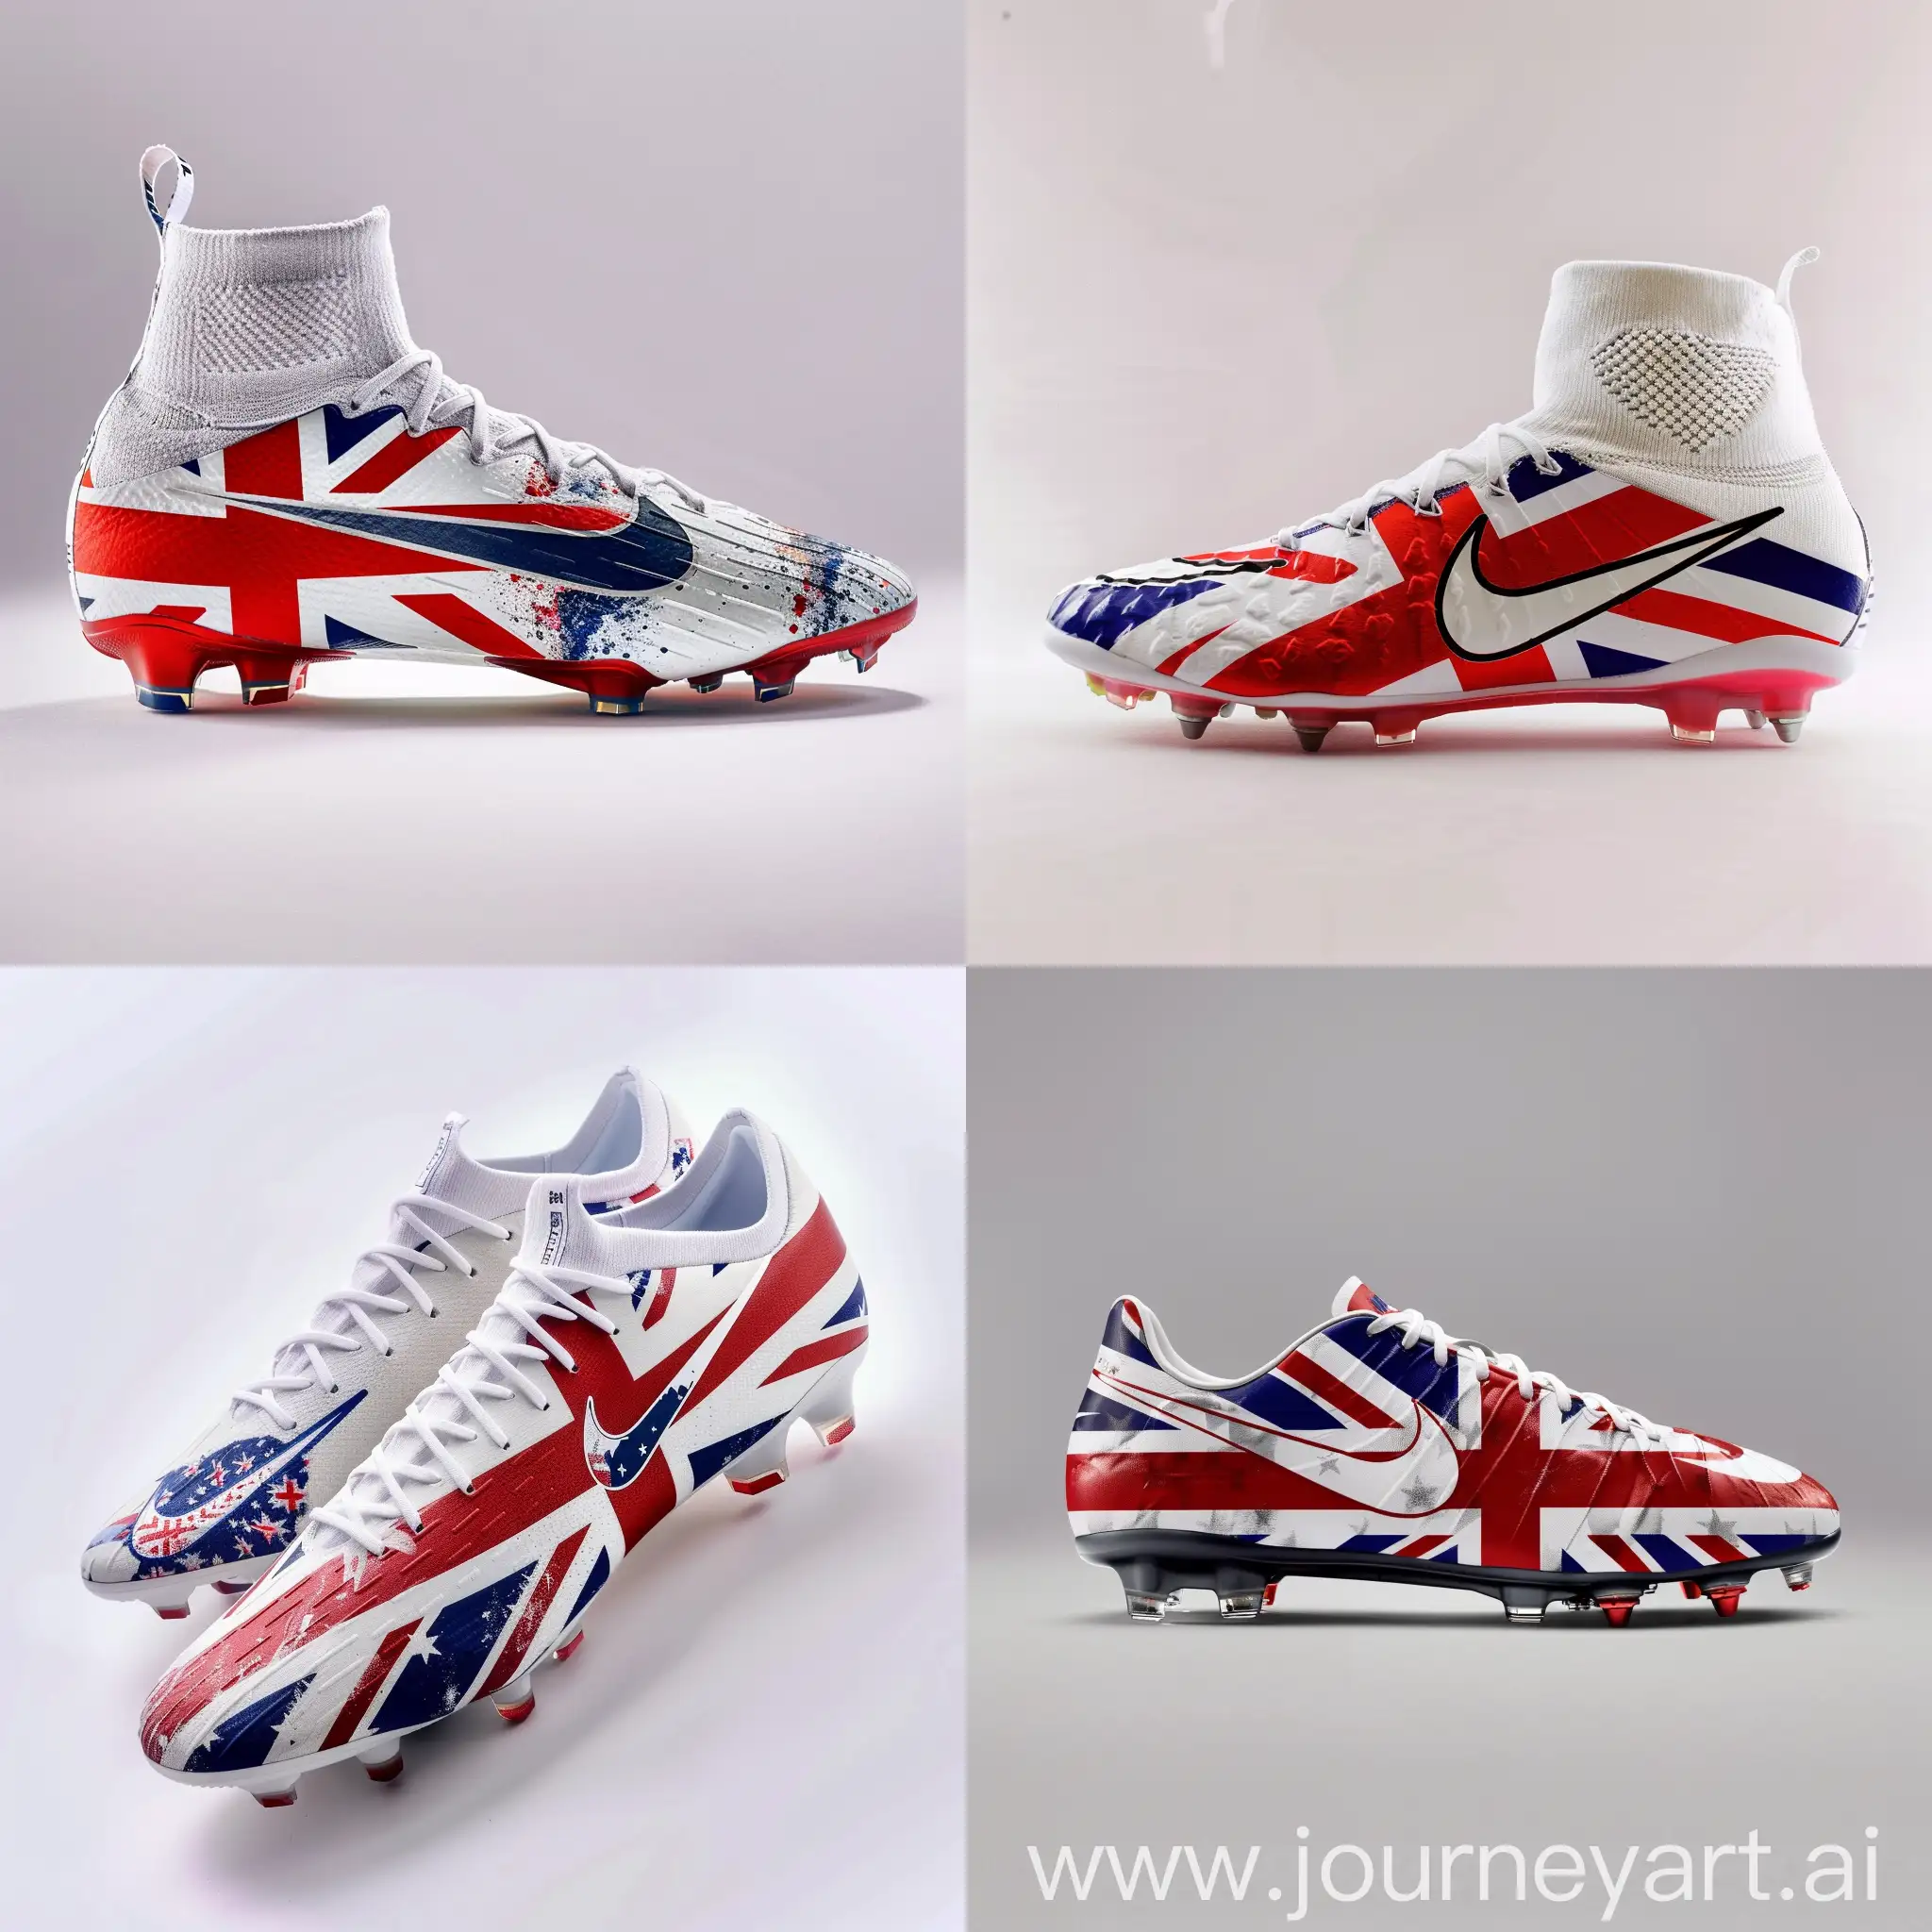 Nike-Soccer-Boots-with-English-Flag-Design-on-Simple-White-Background